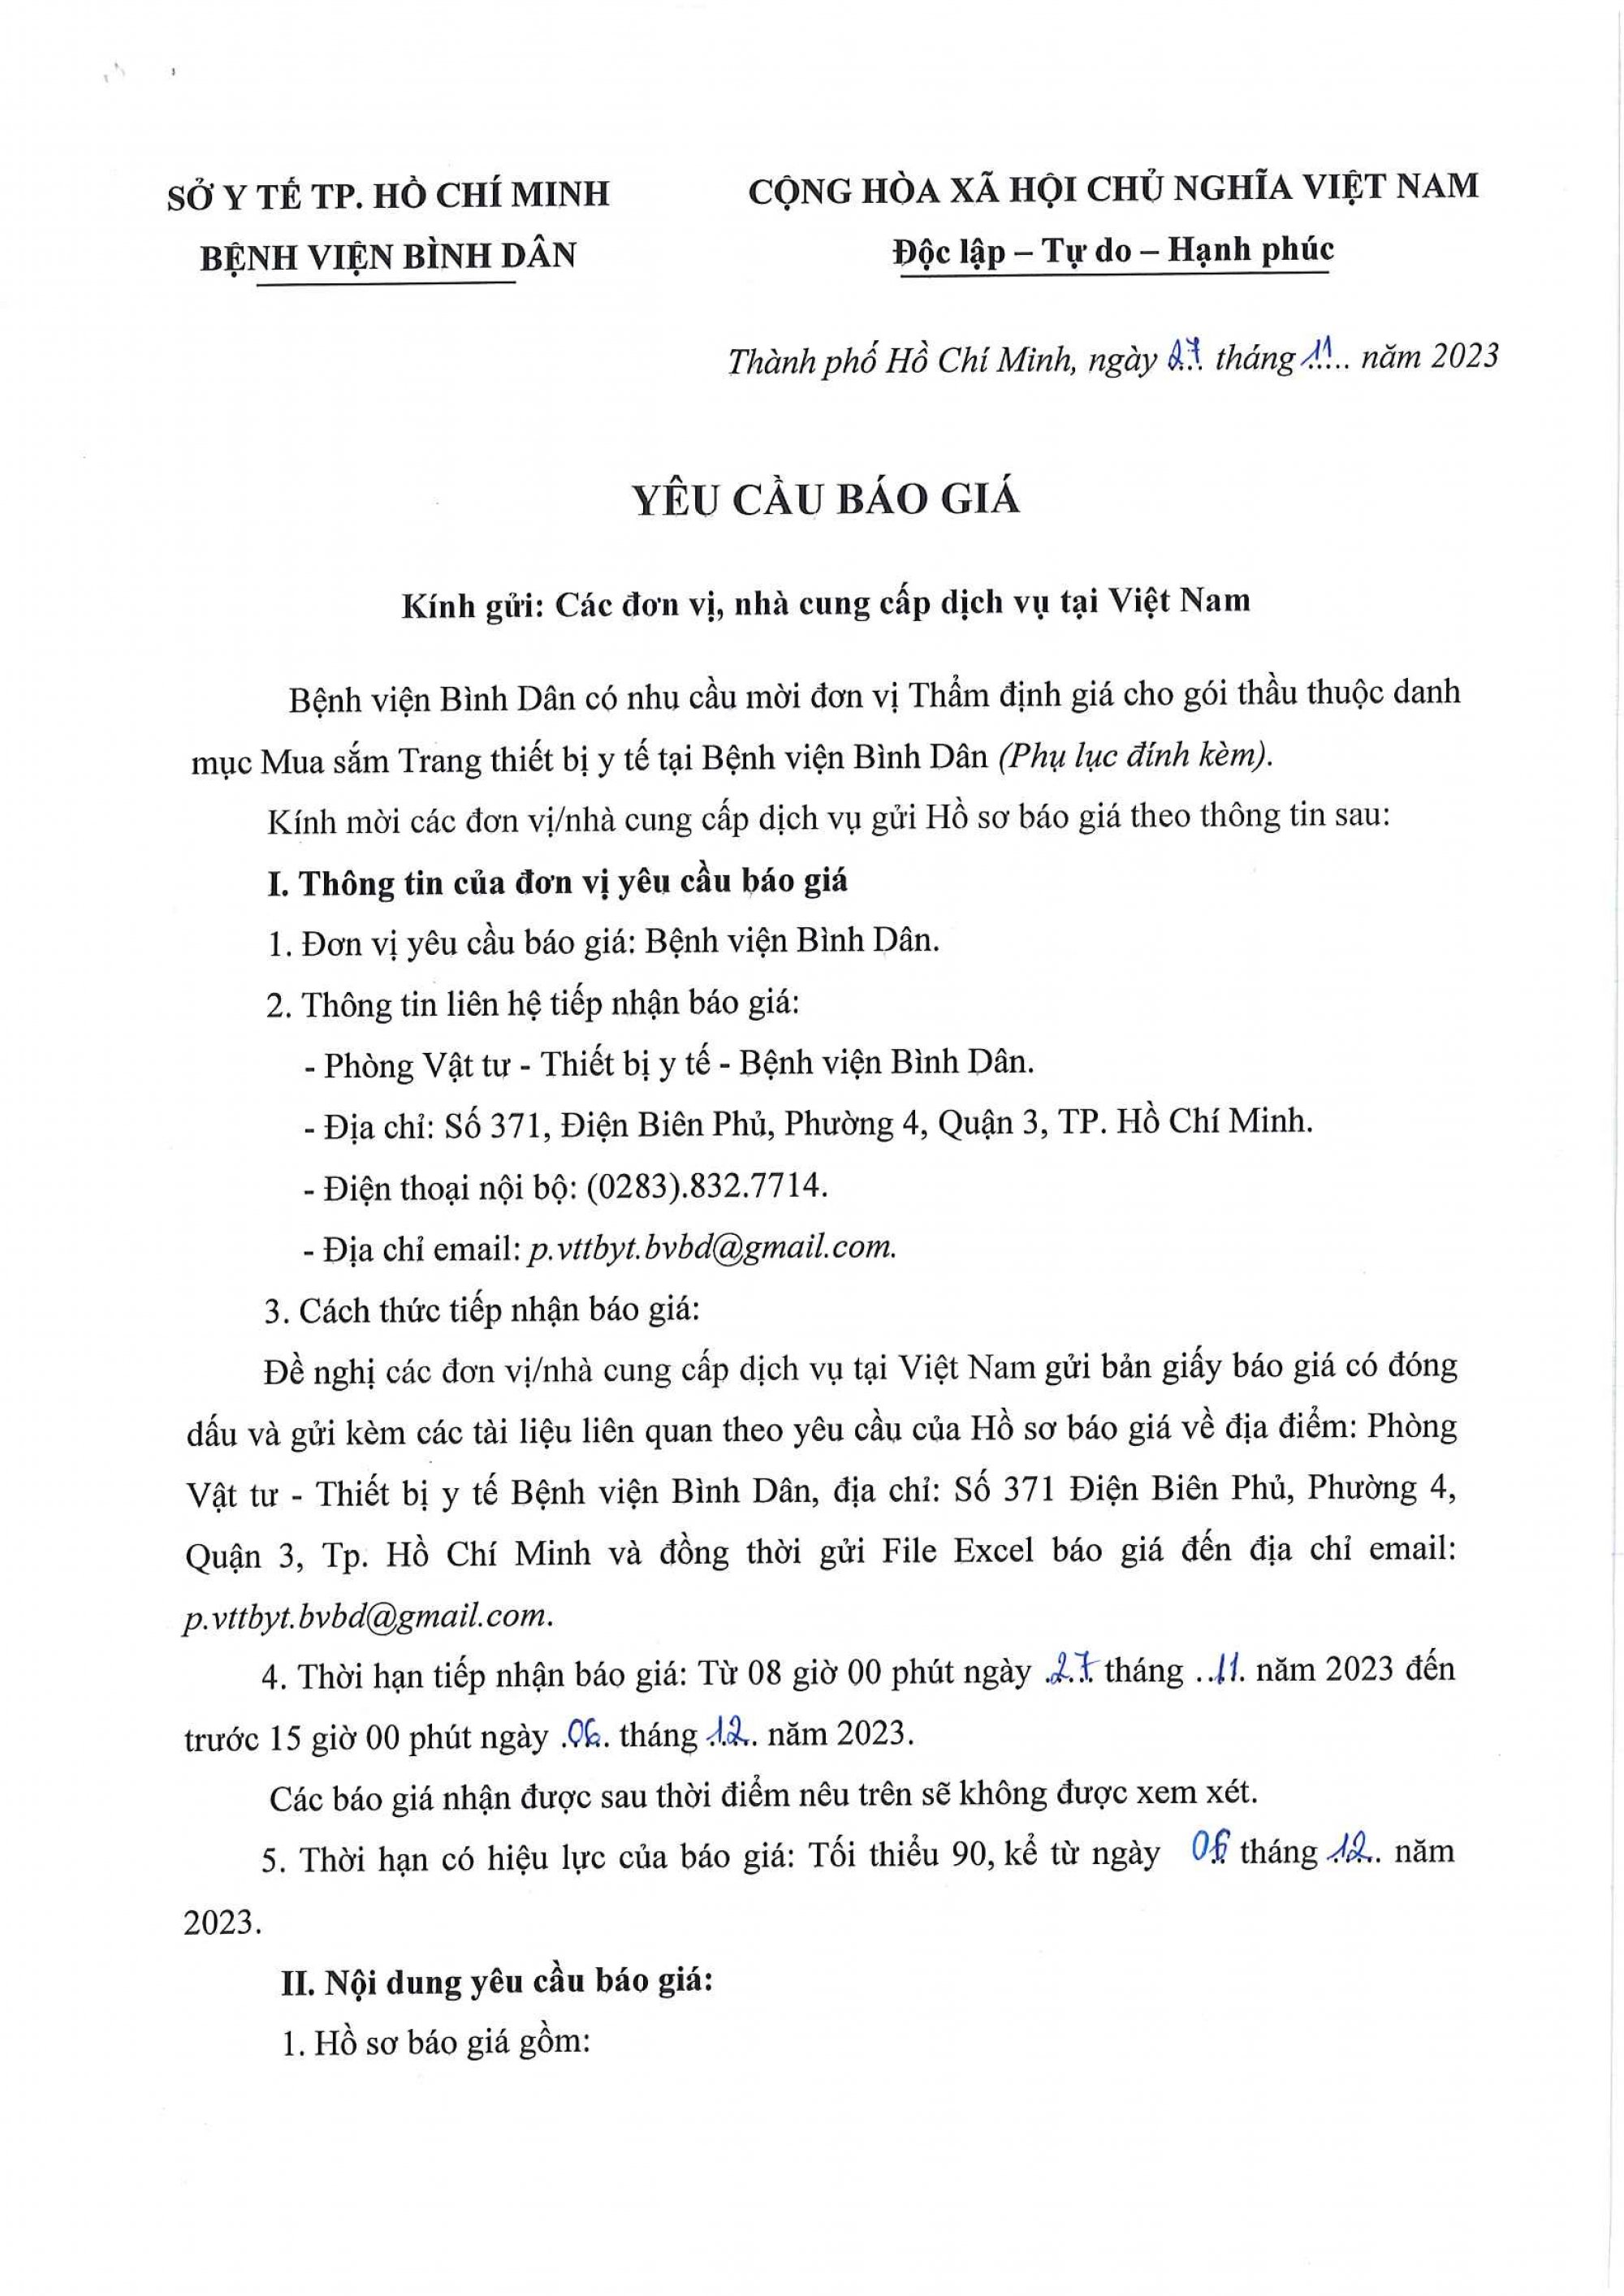 BD_YCBG_Tham_dinh_gia_Page1